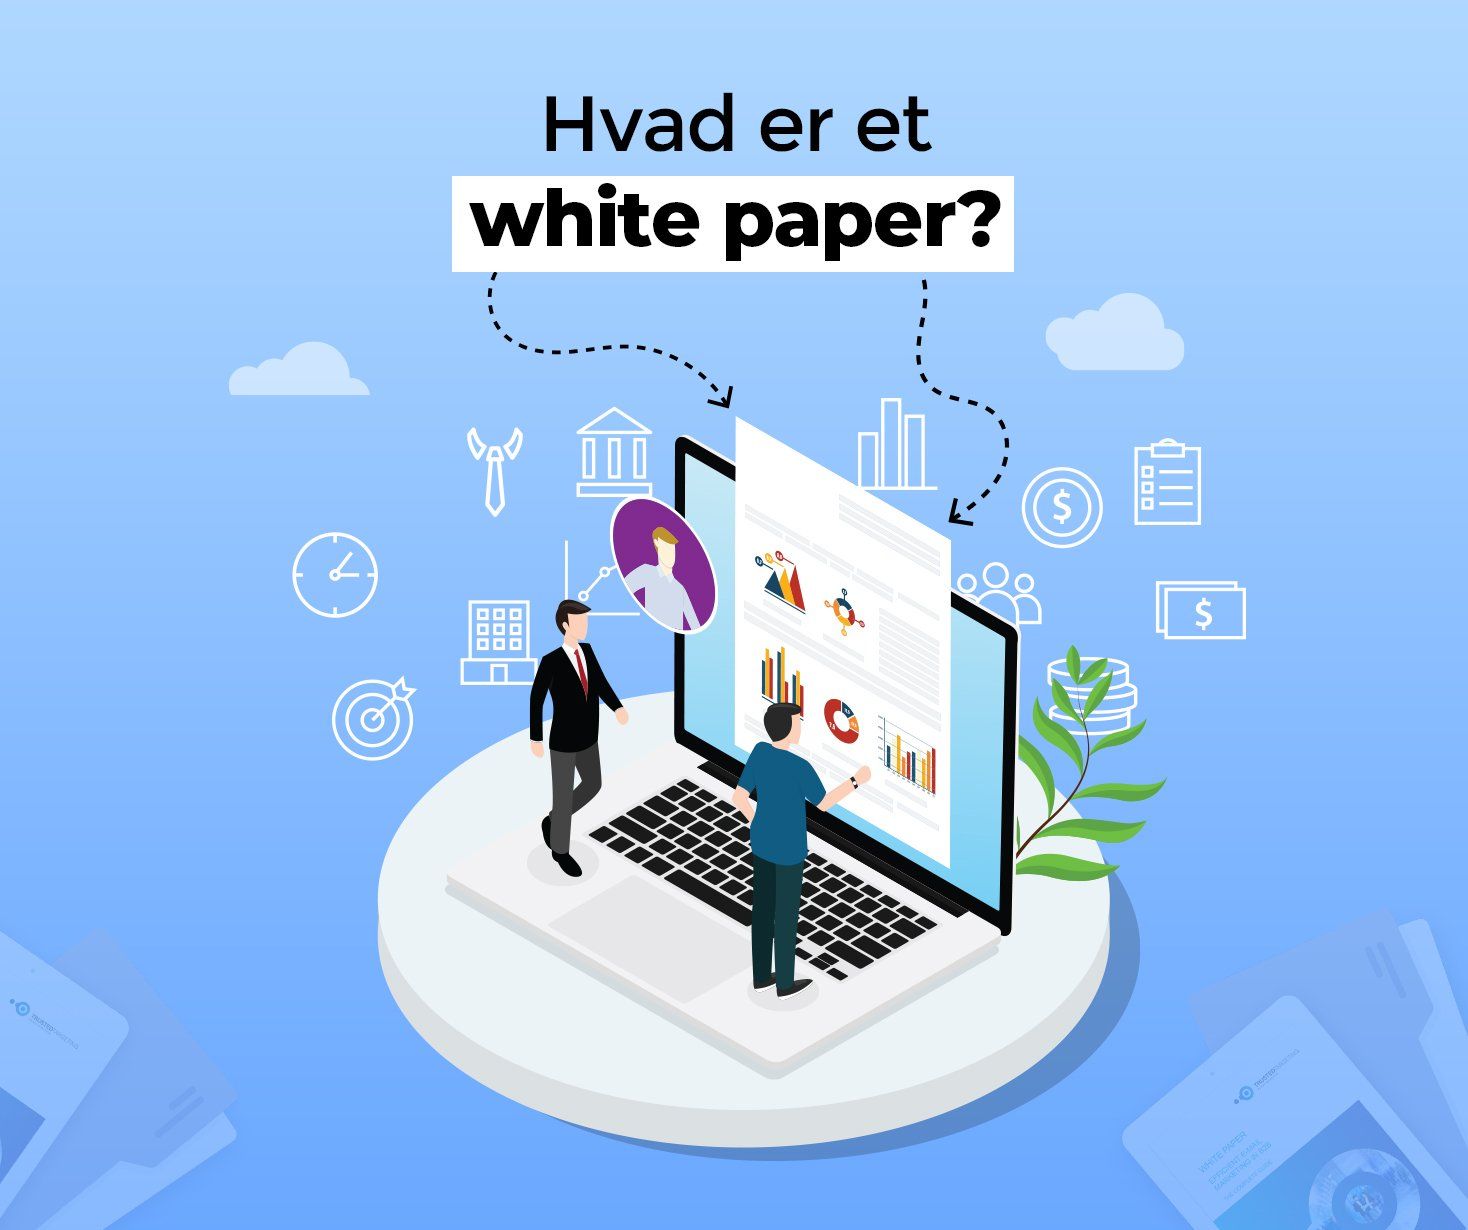 What is a white paper?